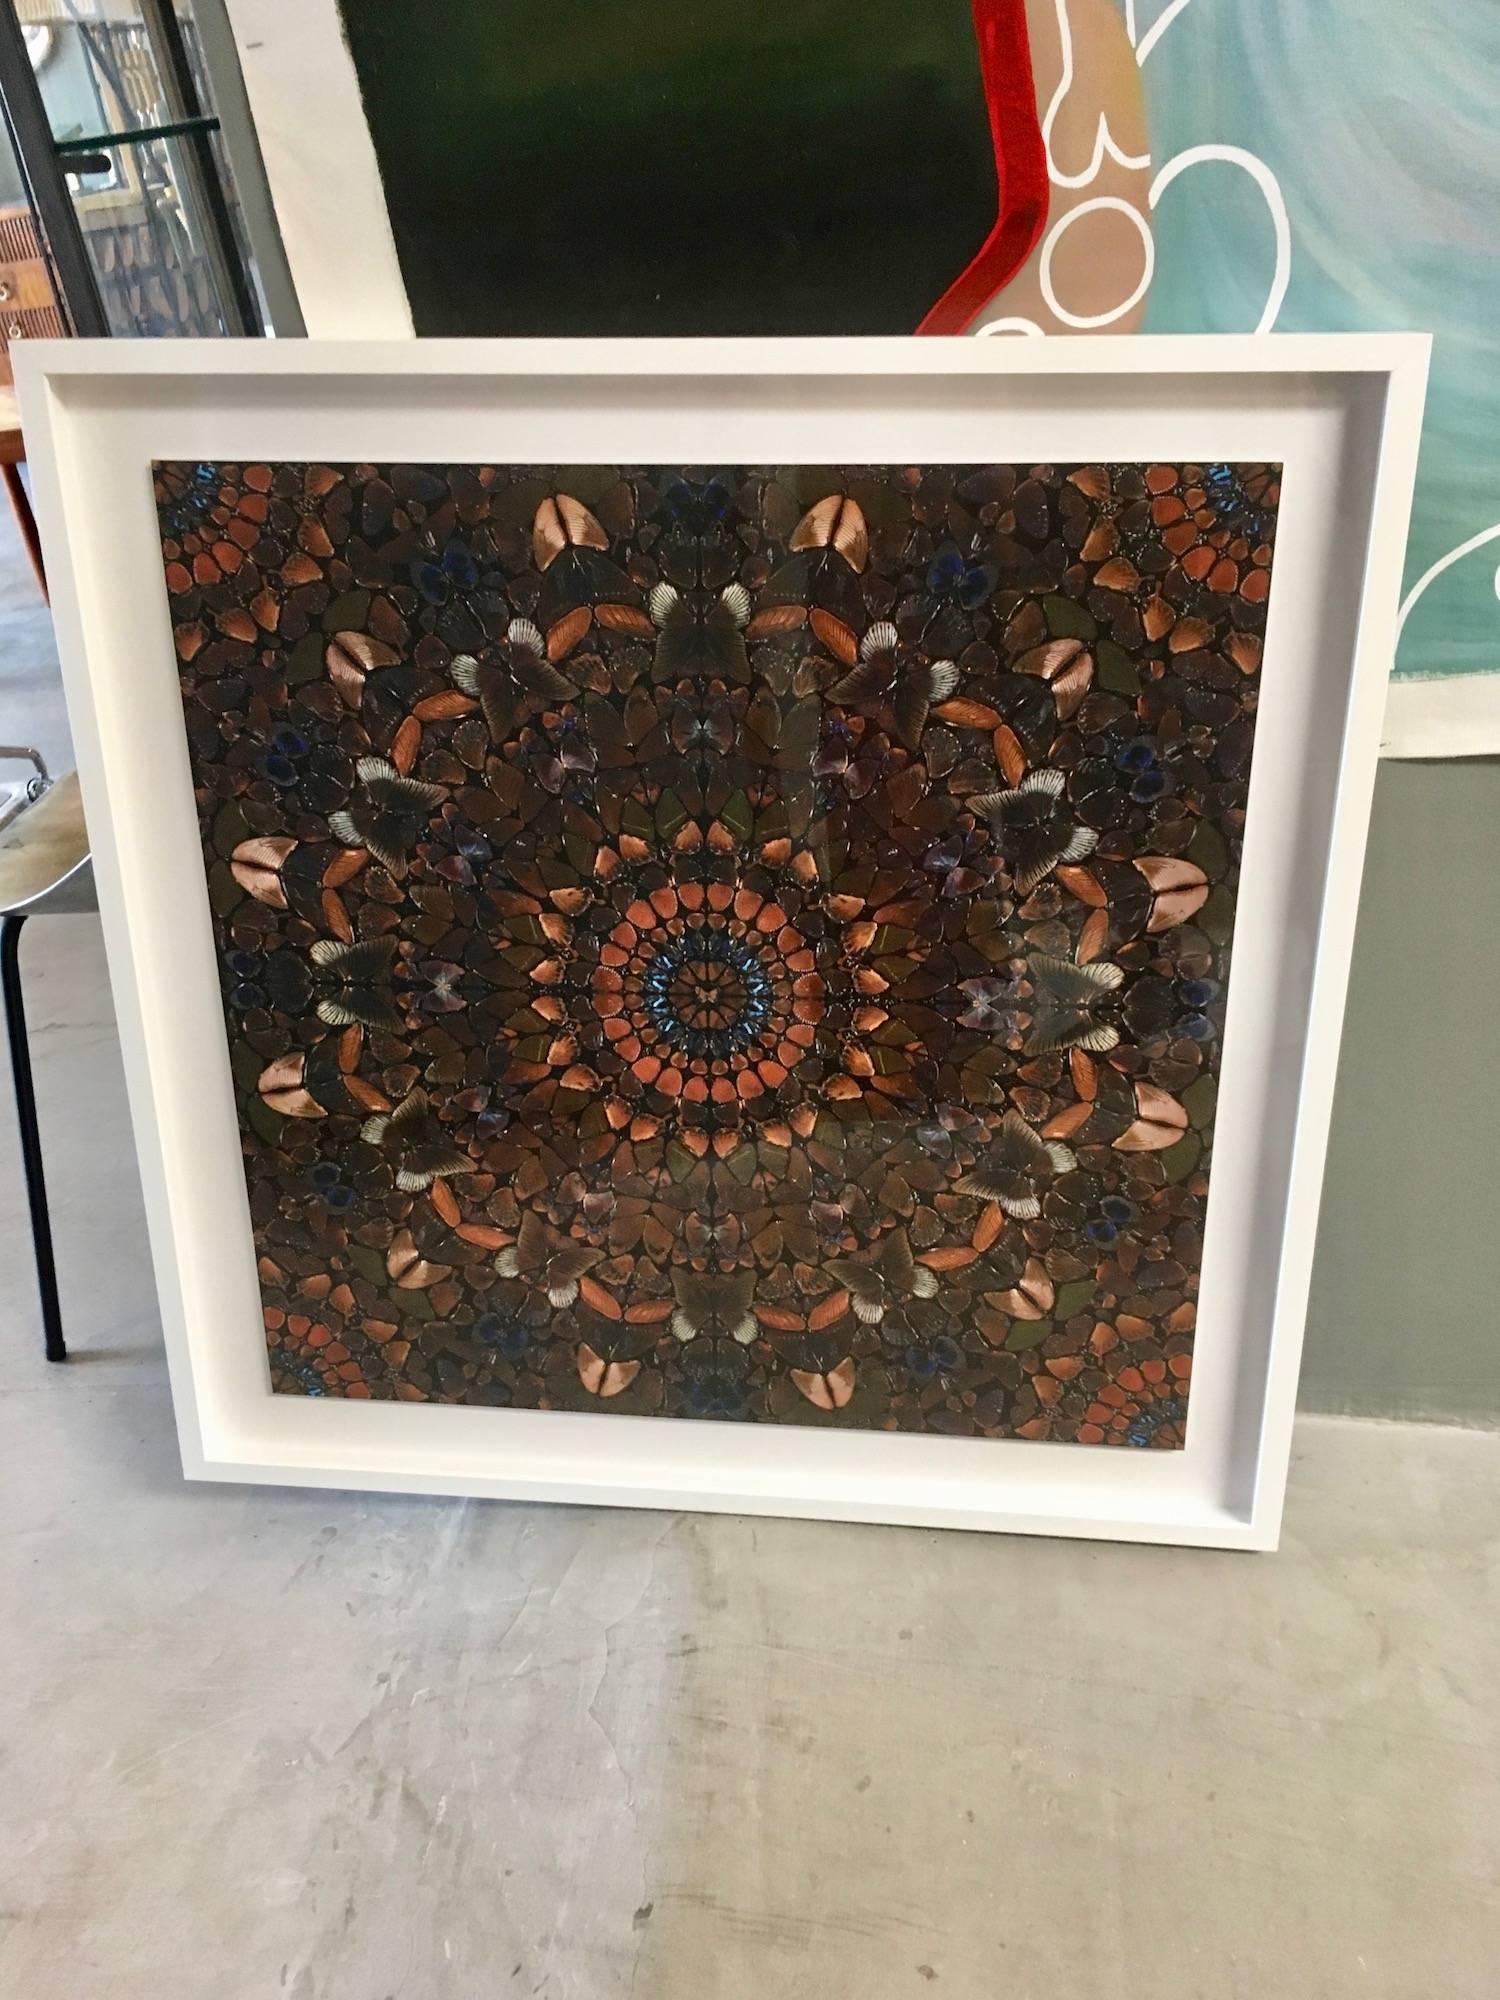 Fantastic piece of wall art by Damien Hirst. Original wallpaper block by Damien Hirst depicting iridescent butterflies. Newly framed. Sold unframed for 575.